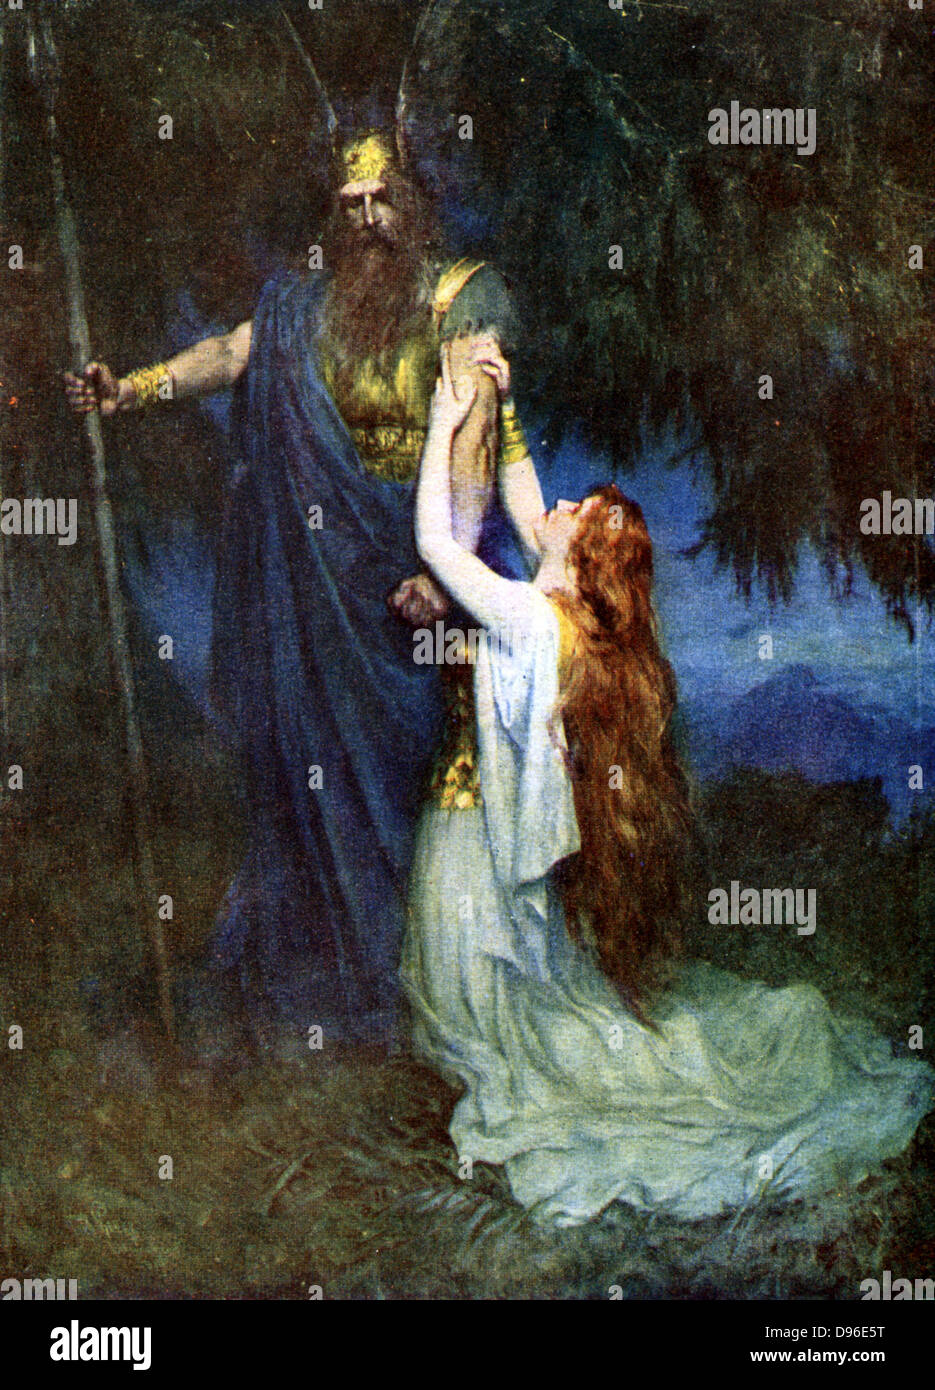 Brunhilde foremost of the Valkyries, daughter of Wotan and Erda, pleading with her father.  Illustration for the opera 'Die Walkure' by Richard Wagner. Stock Photo